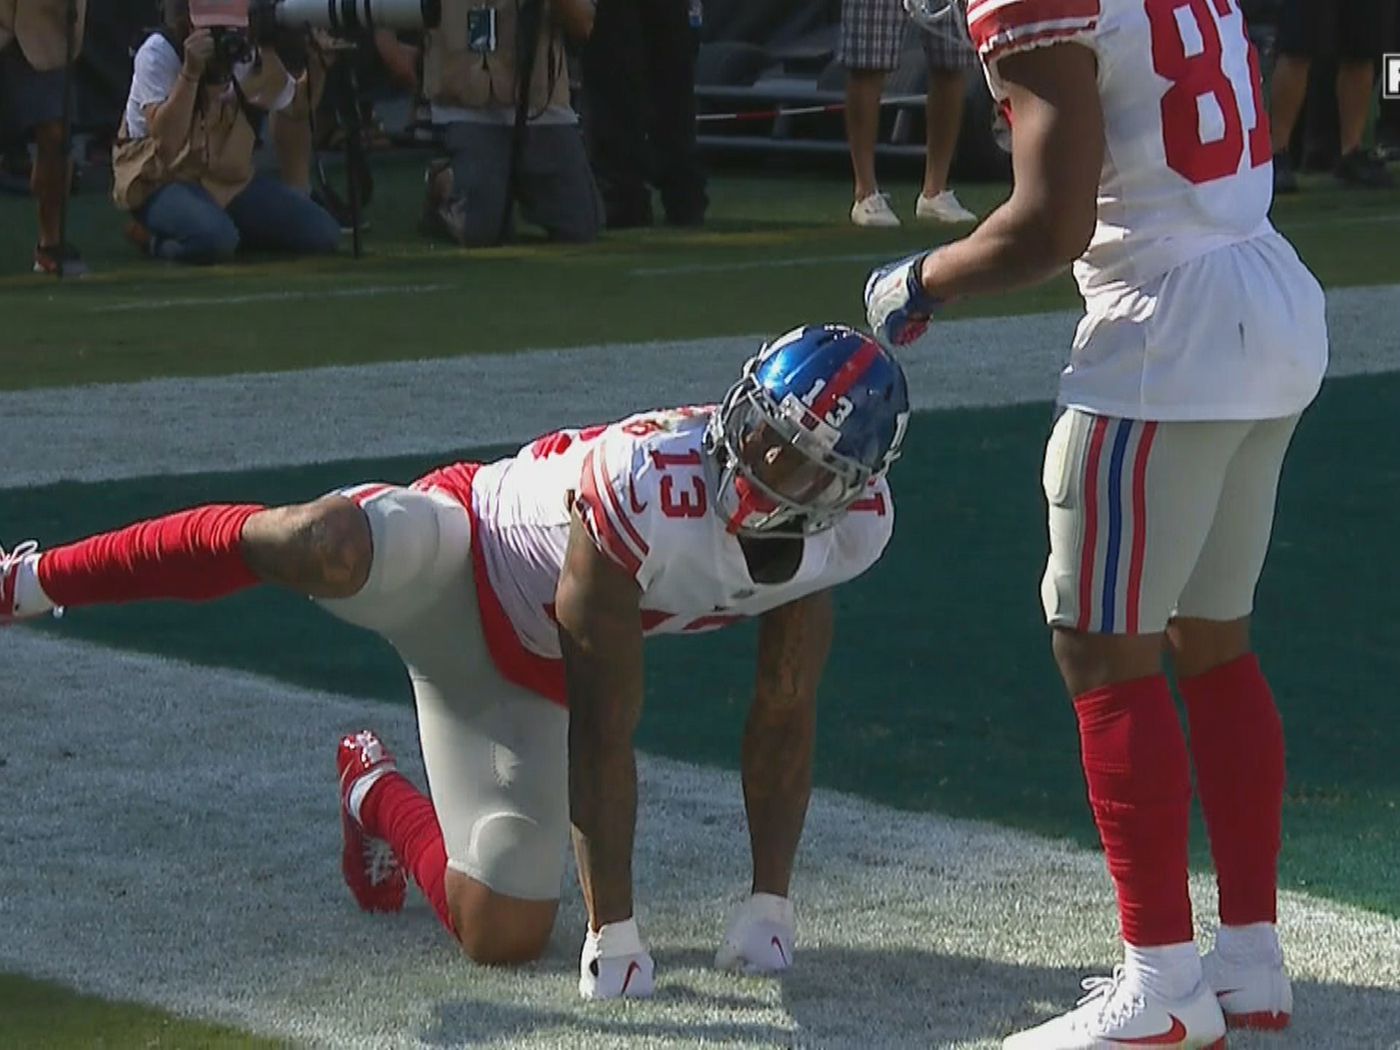 Odell Beckham Jr. pretends to be a dog peeing to celebrate his